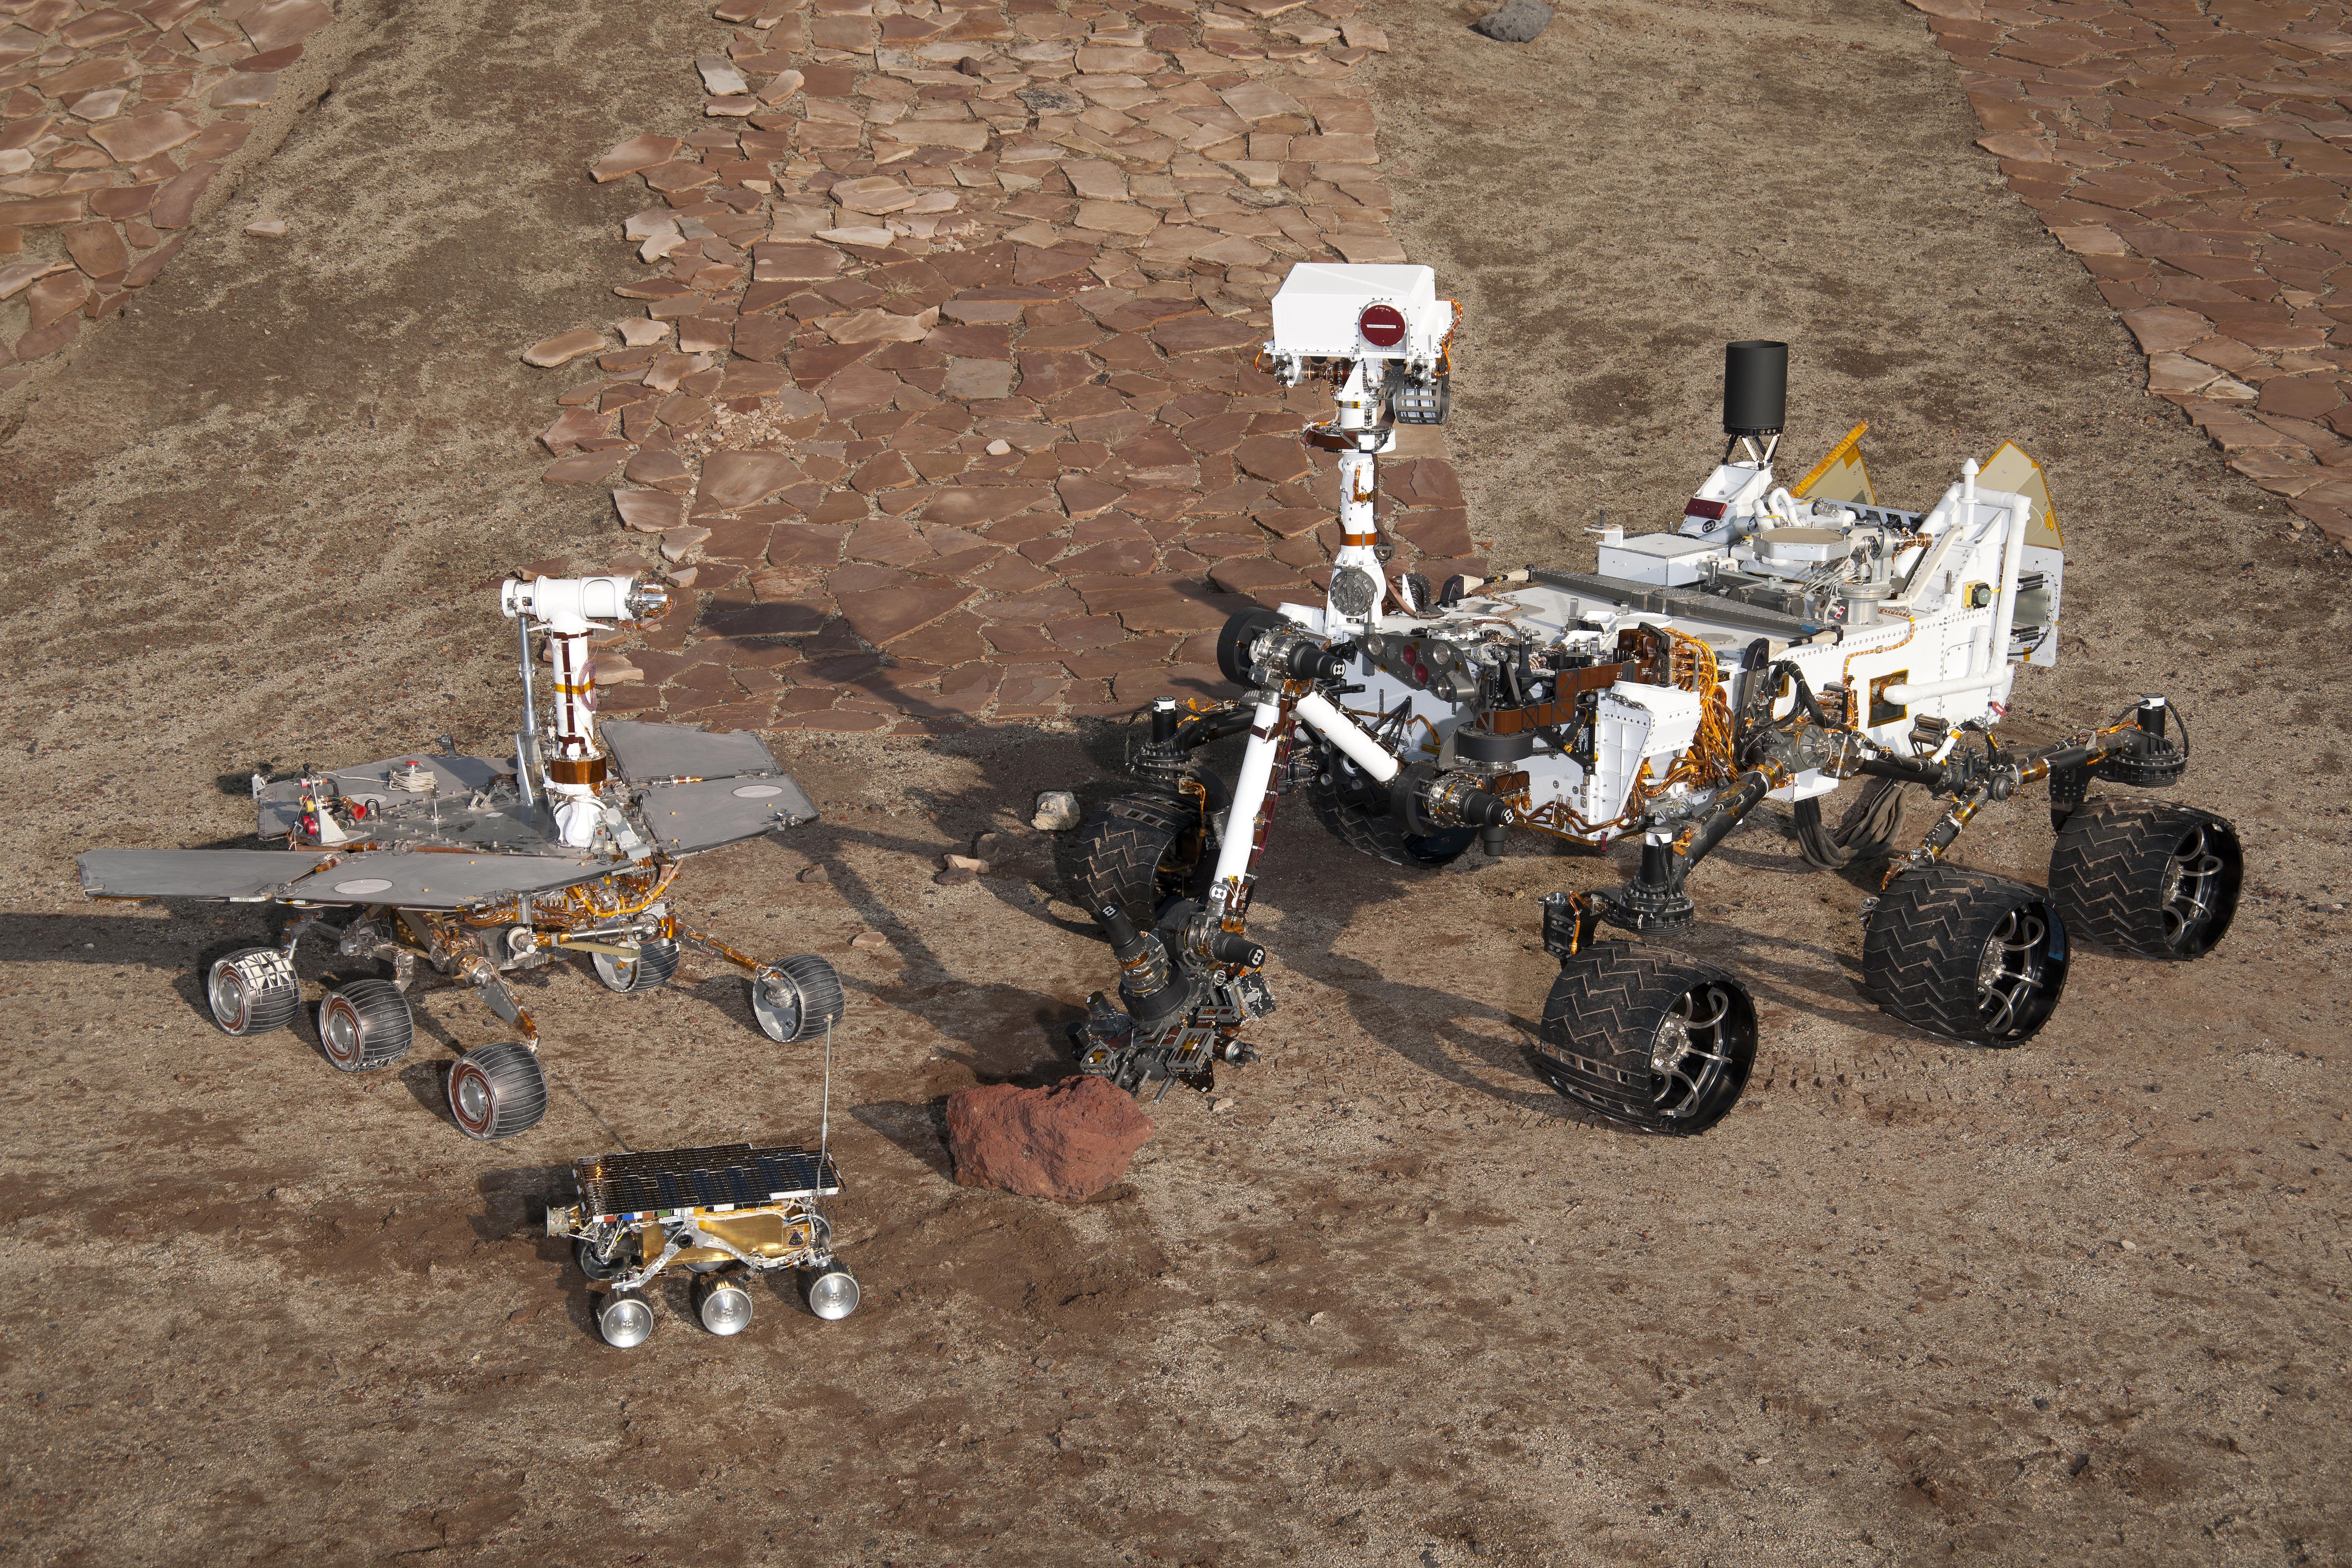 NASA's Curiosity rover can now pick which bits of Mars to scan on its own